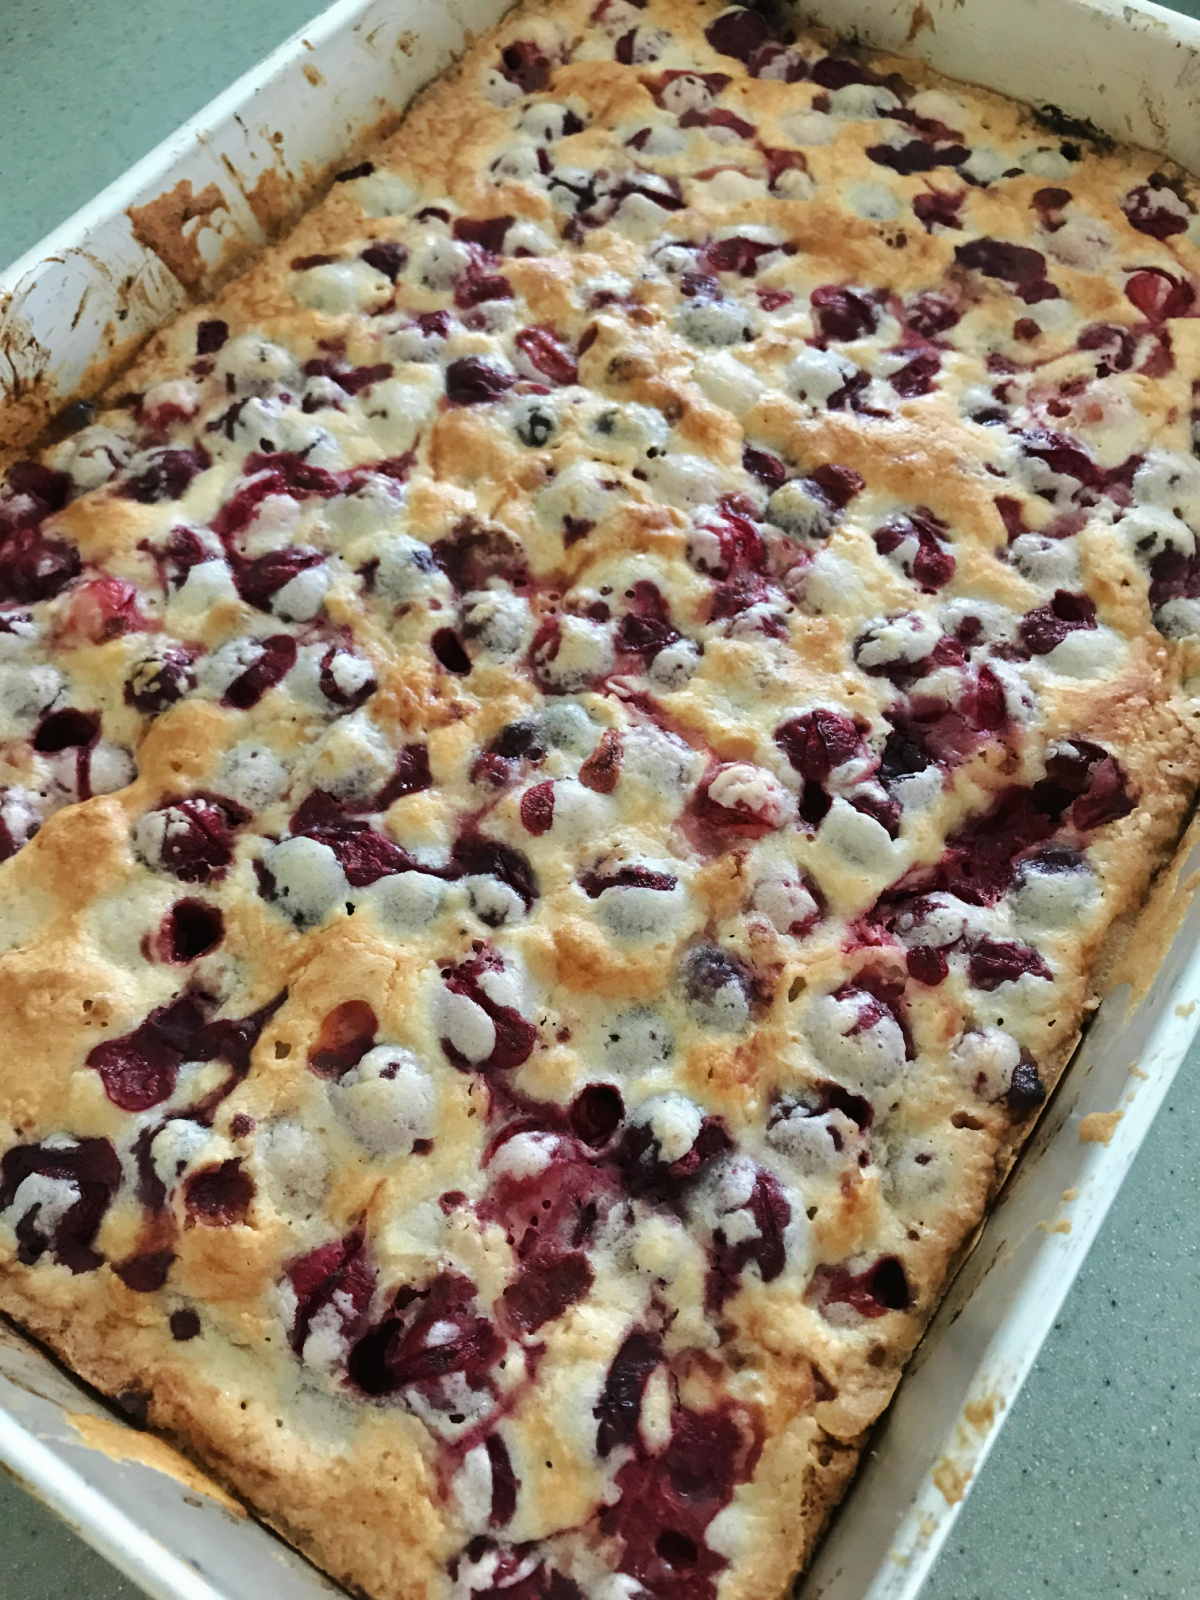 Cranberry Almond Bars cooling on a counter.